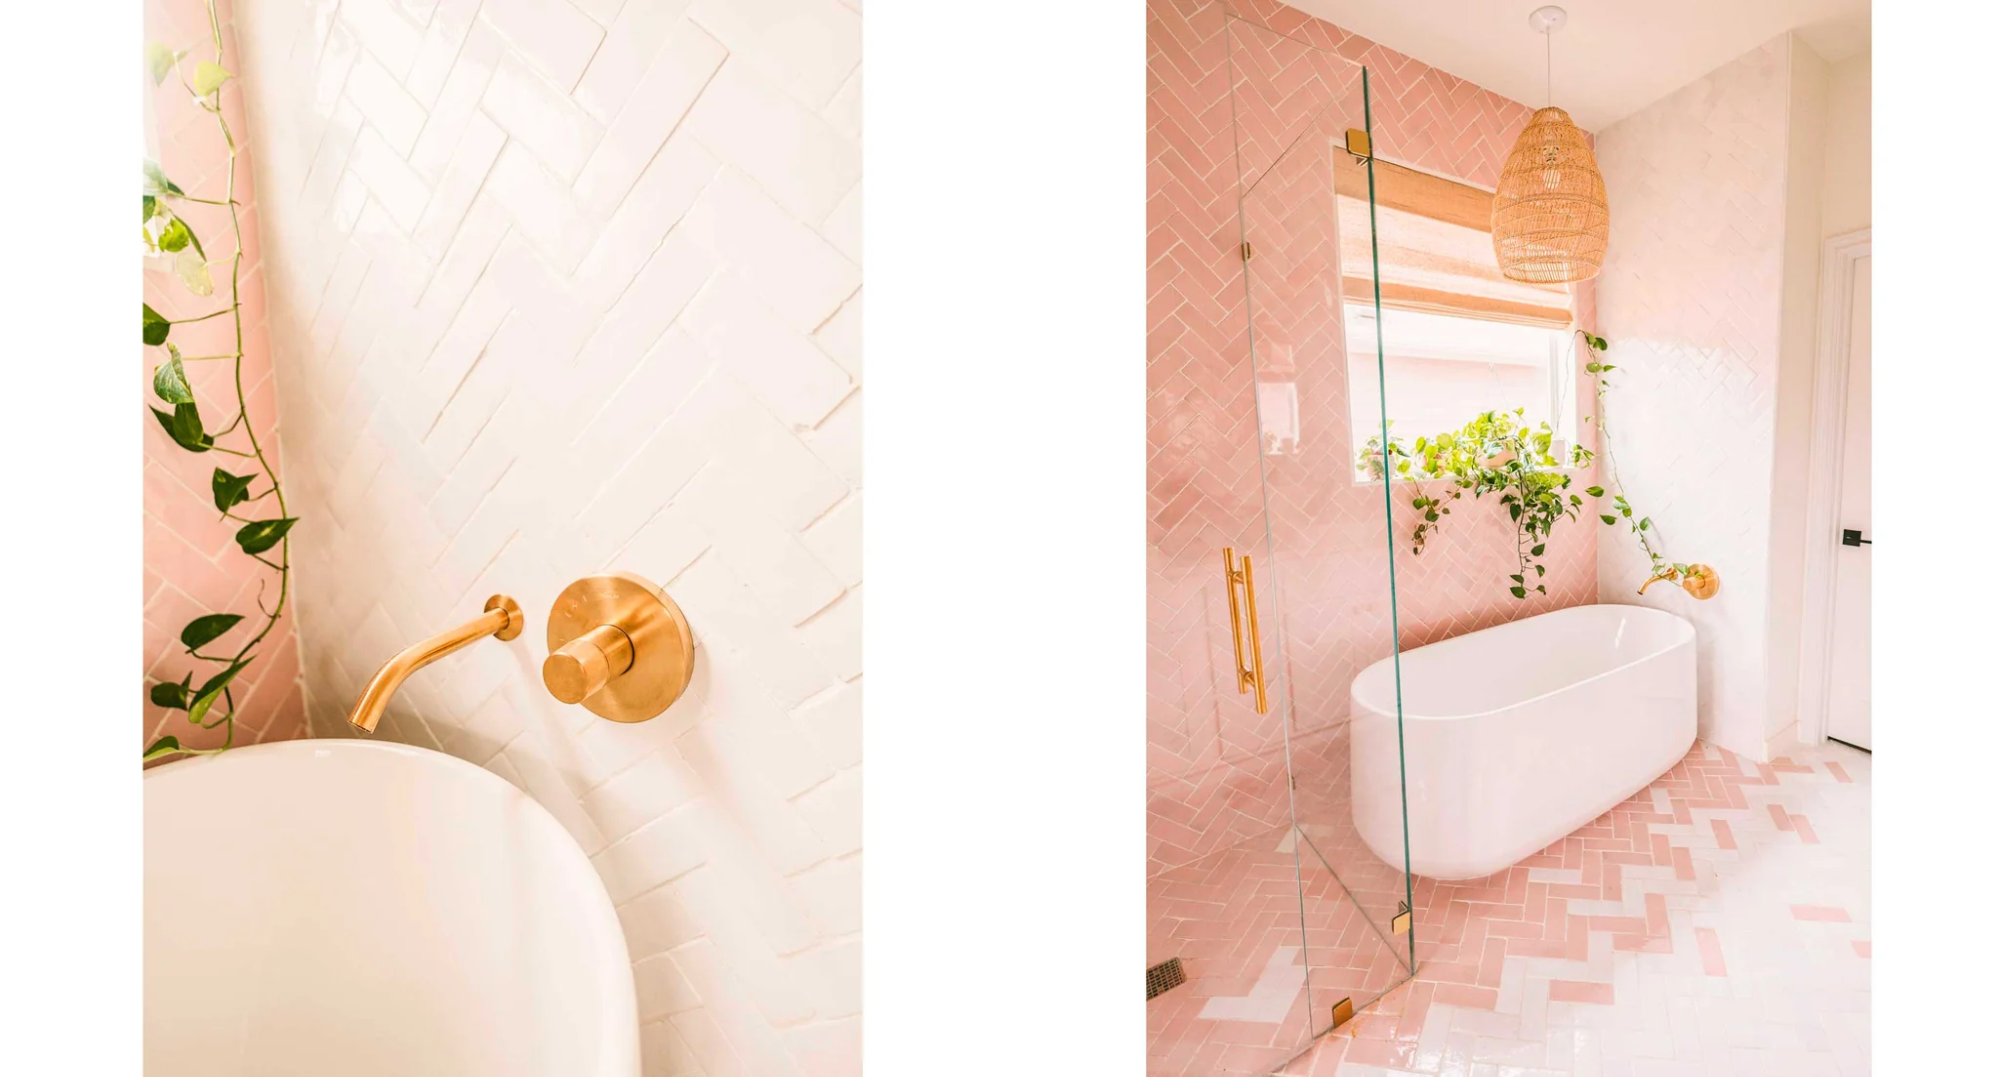 Bathroom and shower room with pink and white tiles